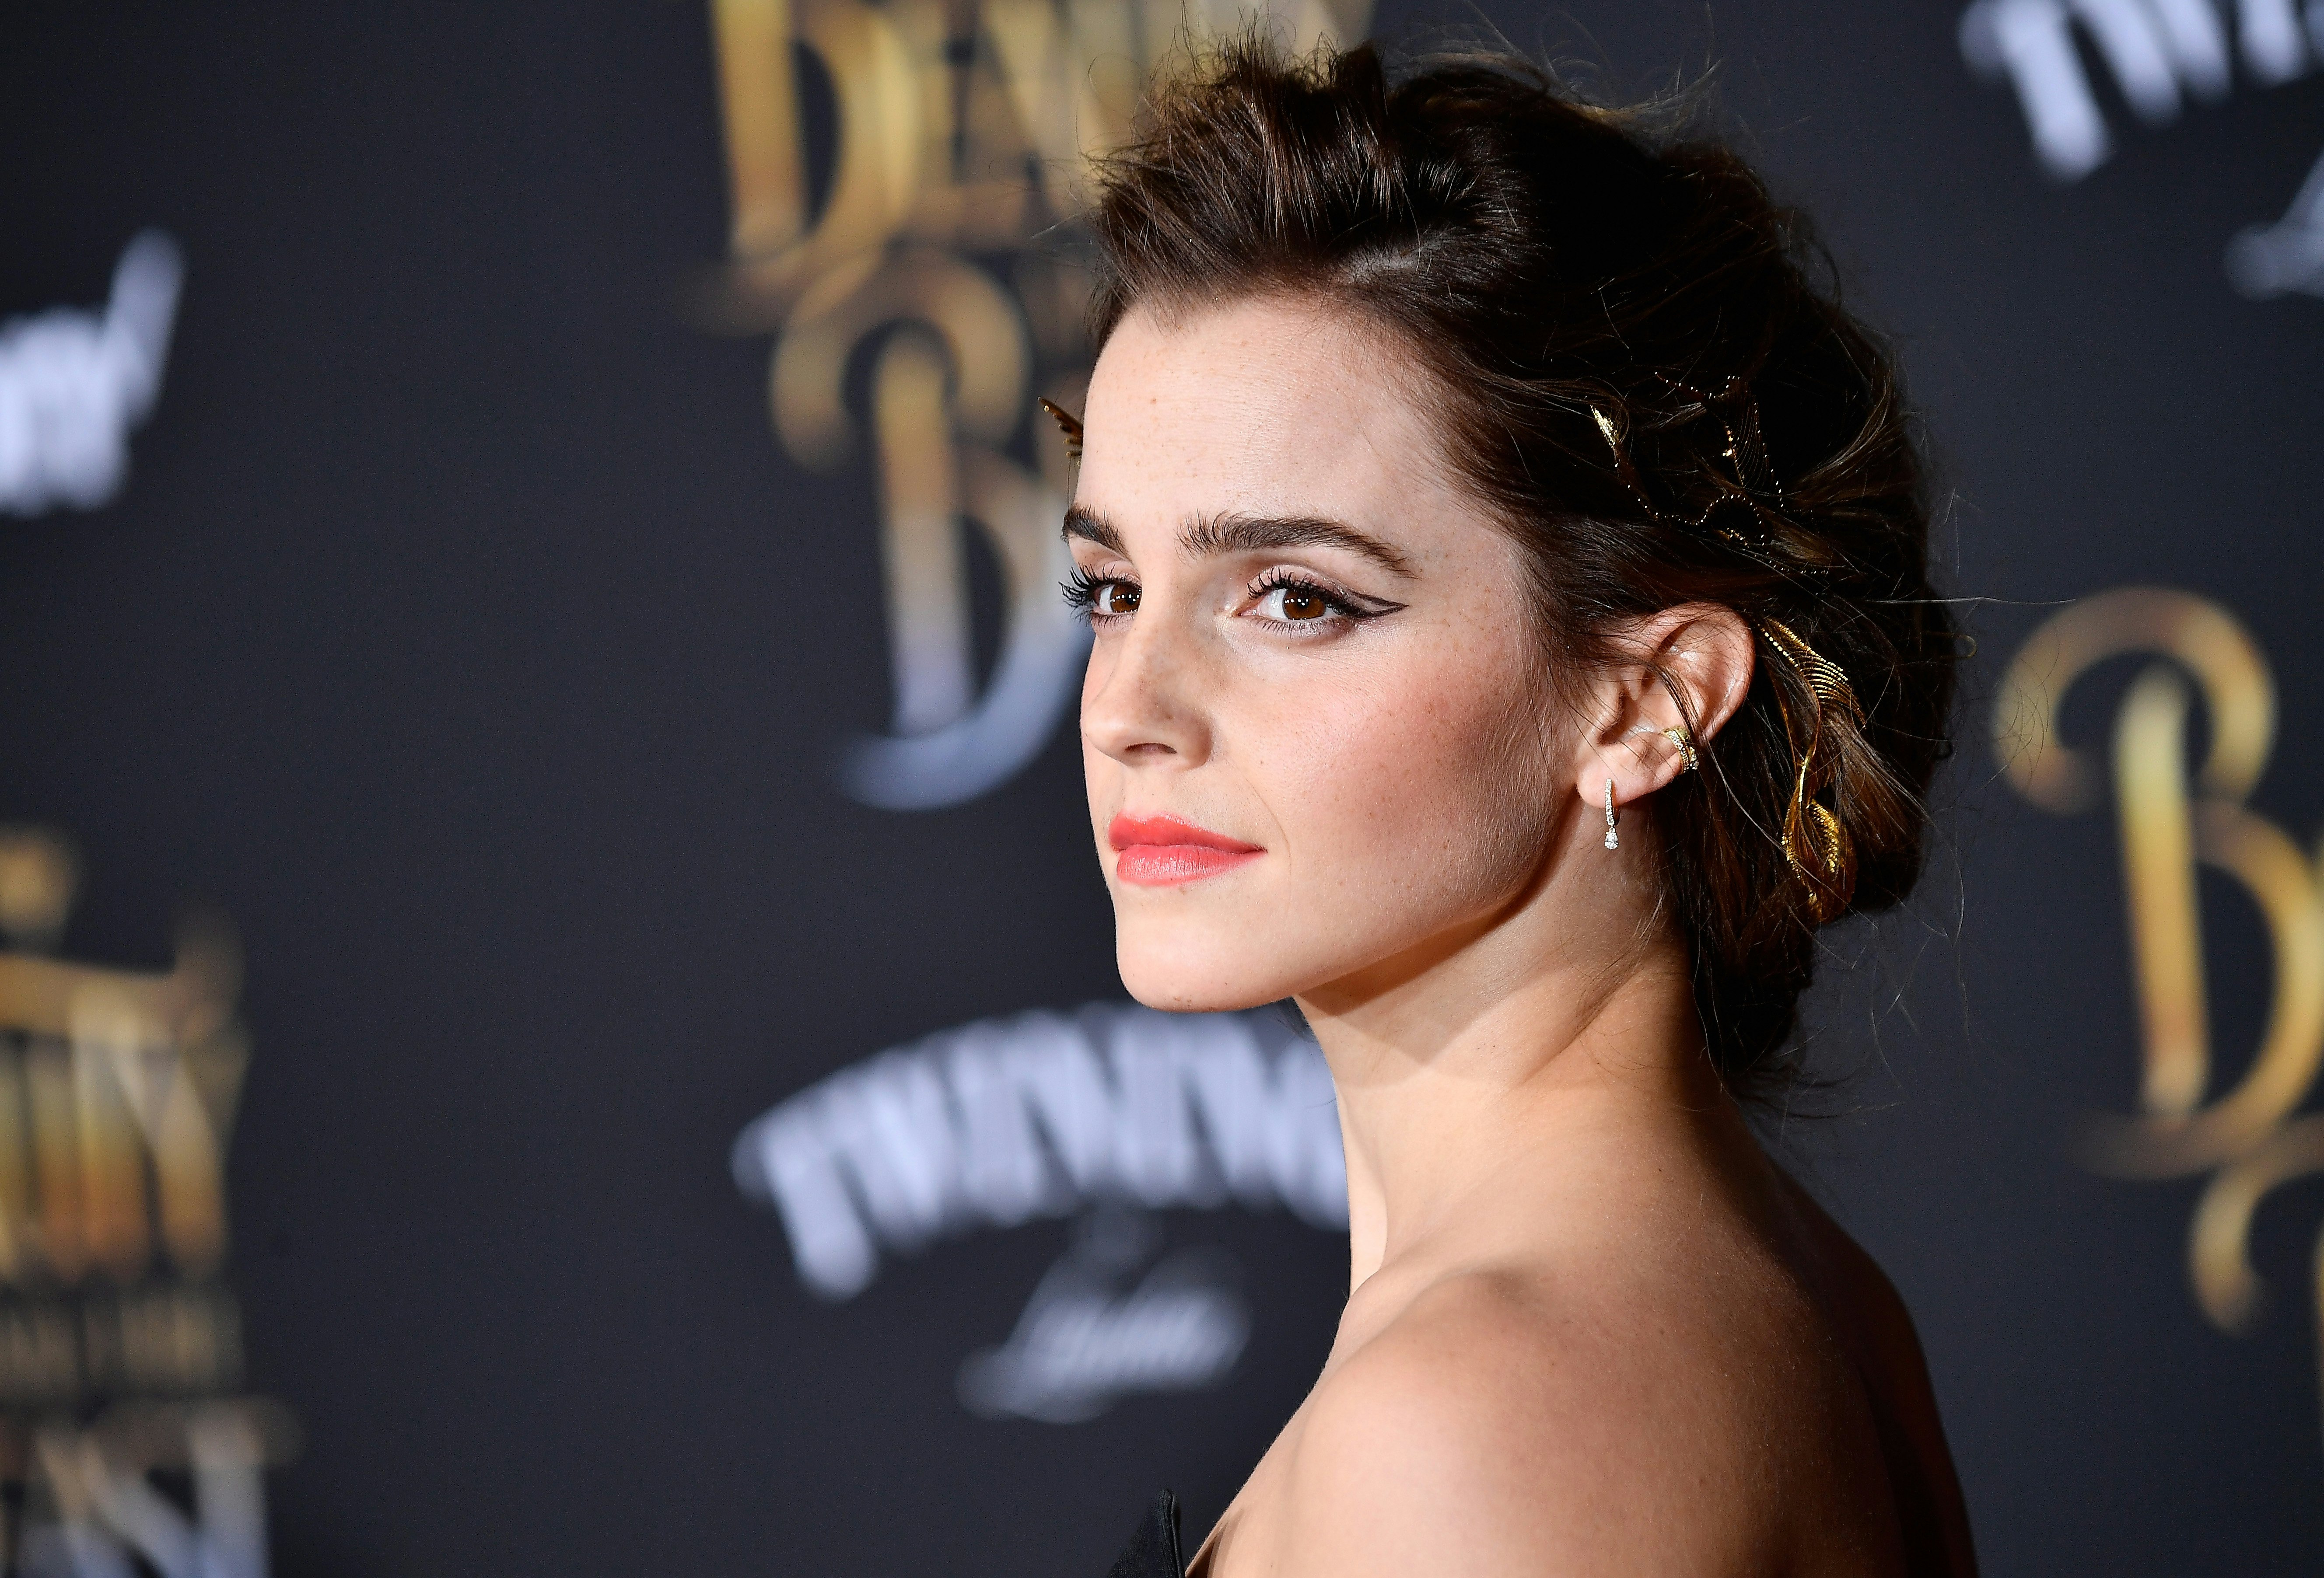 Emma Watson Responds To The Vanity Fair Photo Backlash In